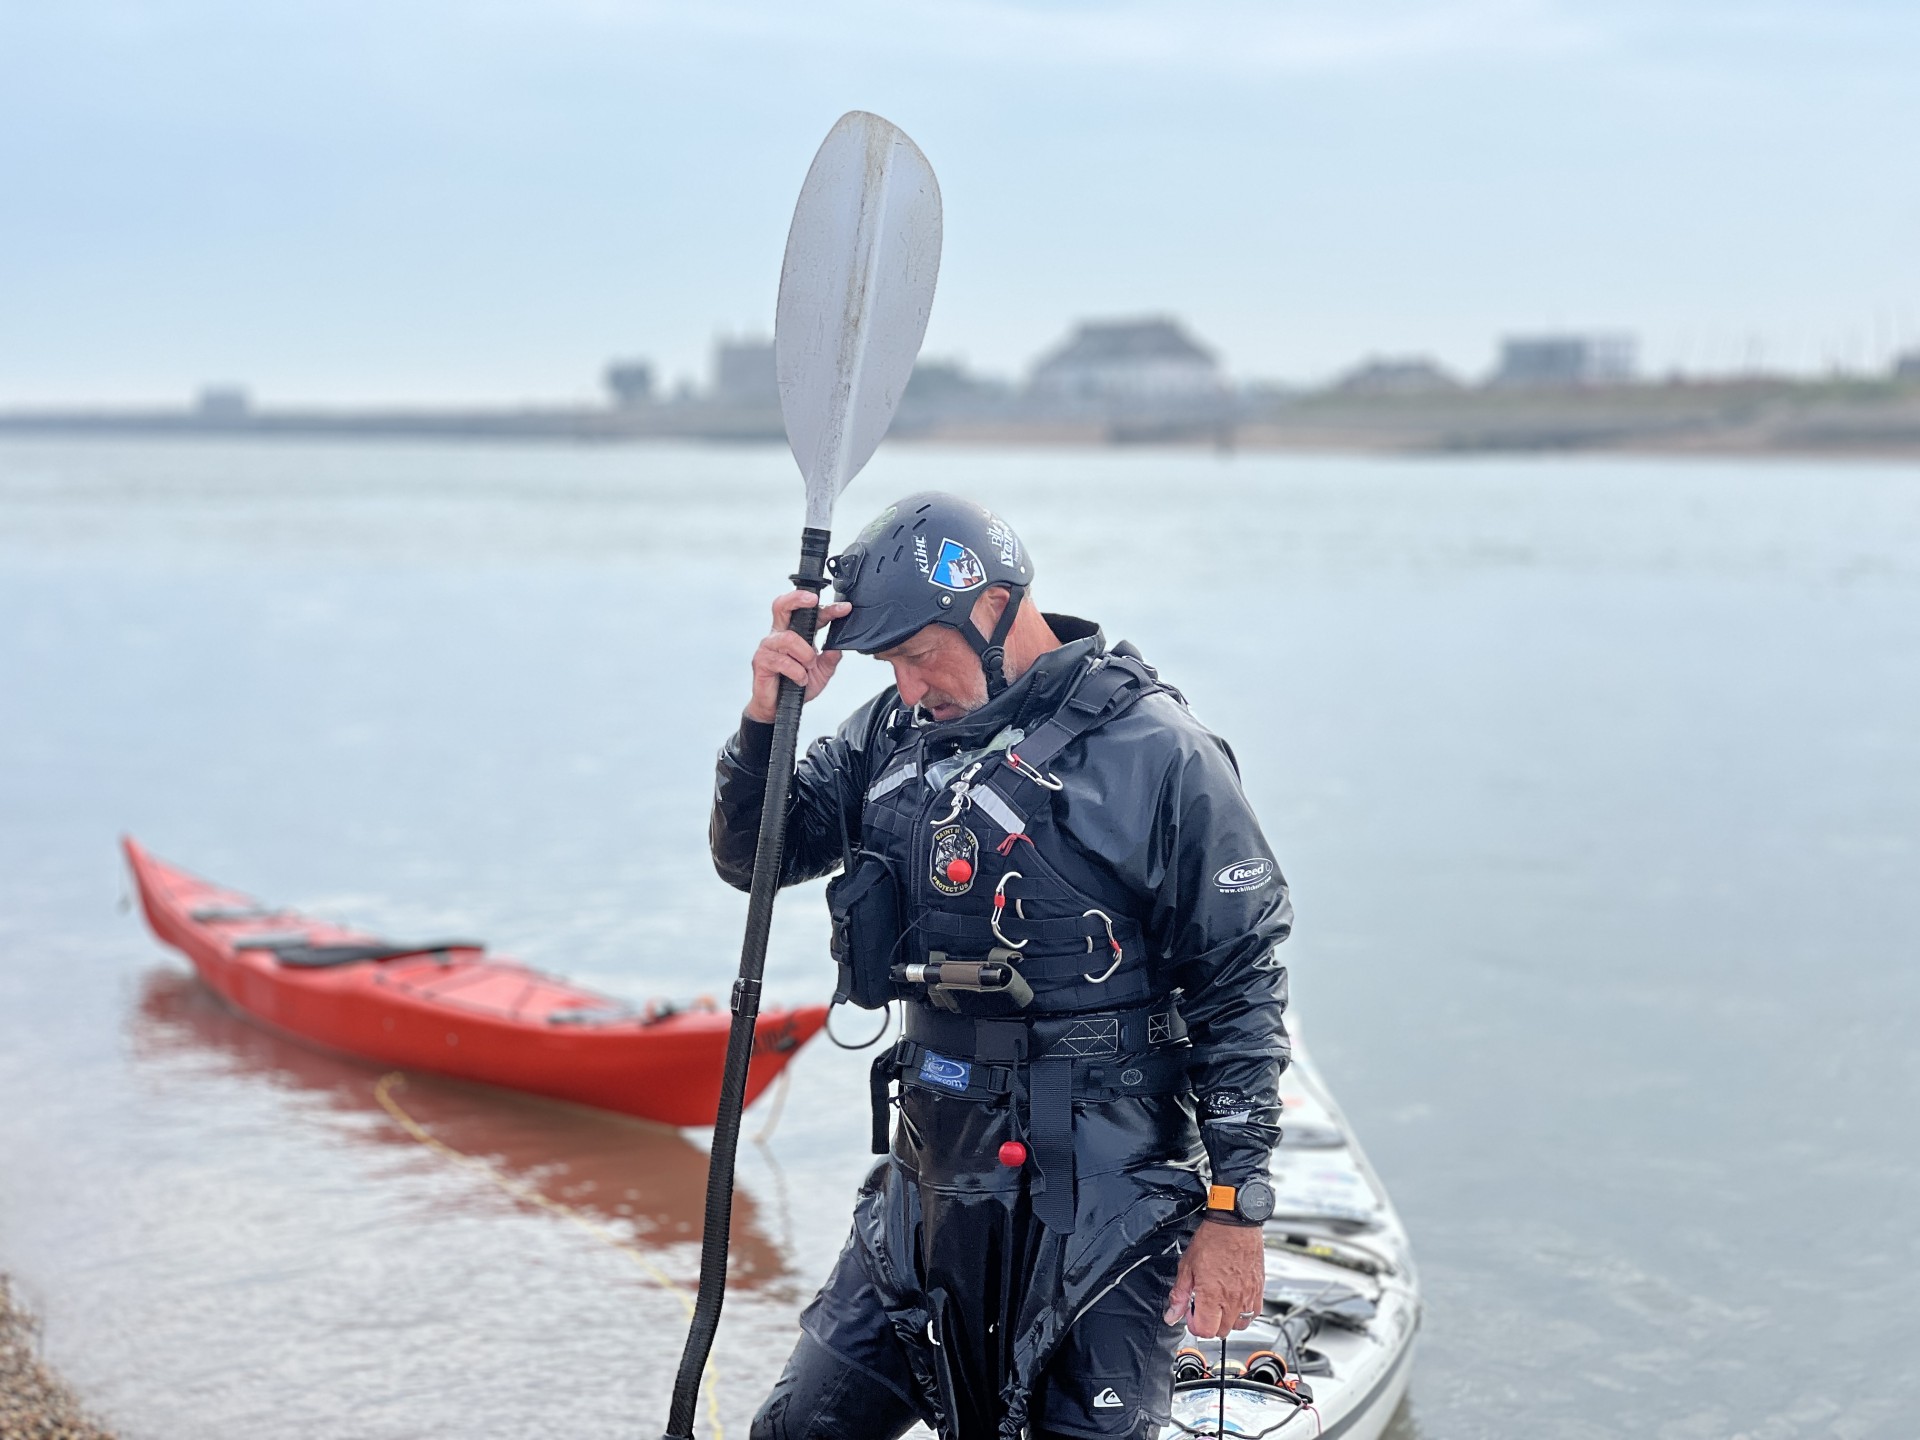 Lead guide with NOMAD Sea Kayaking.